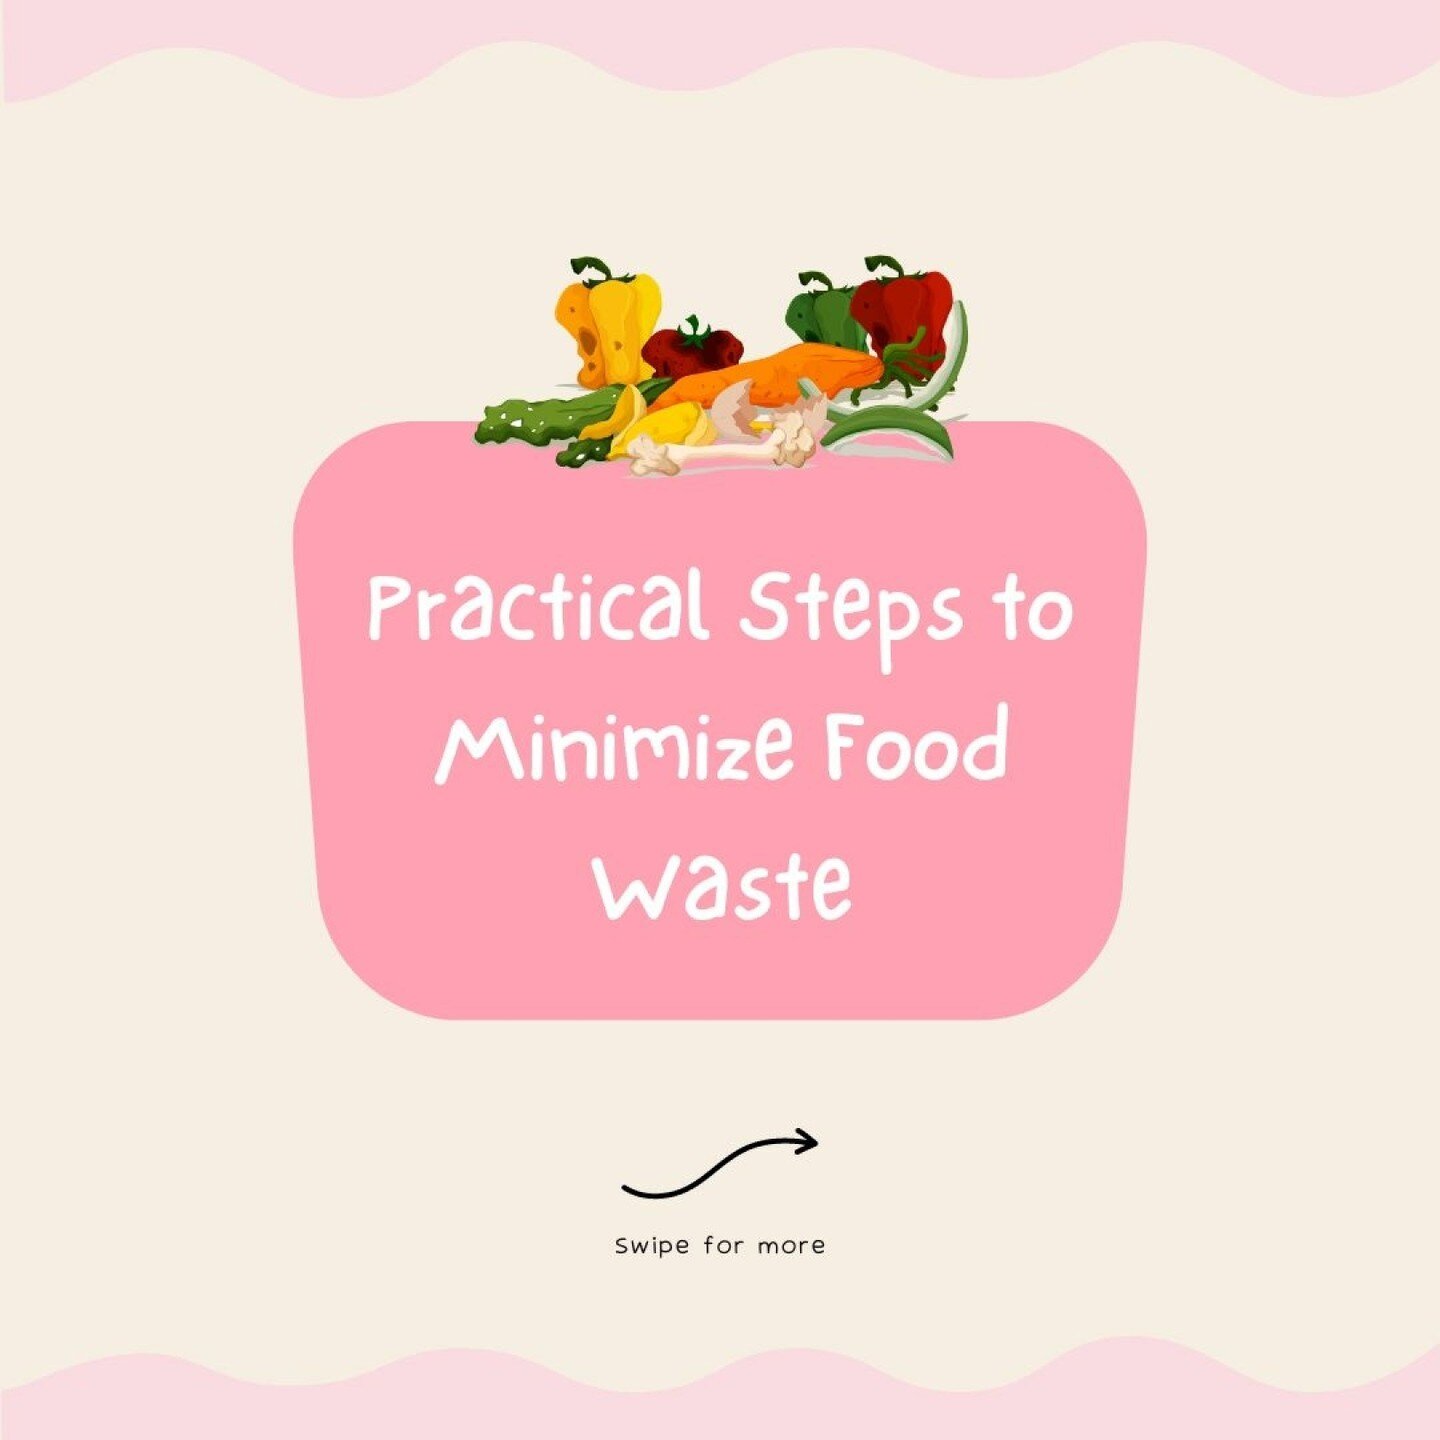 🍽️ Did you know reducing food waste is crucial to building a more sustainable food system? 

🍽️ Plan Meals and Shop Smart: Make a grocery list based on planned meals to avoid buying more than needed.
🍽️ Store Food Properly: Use airtight containers